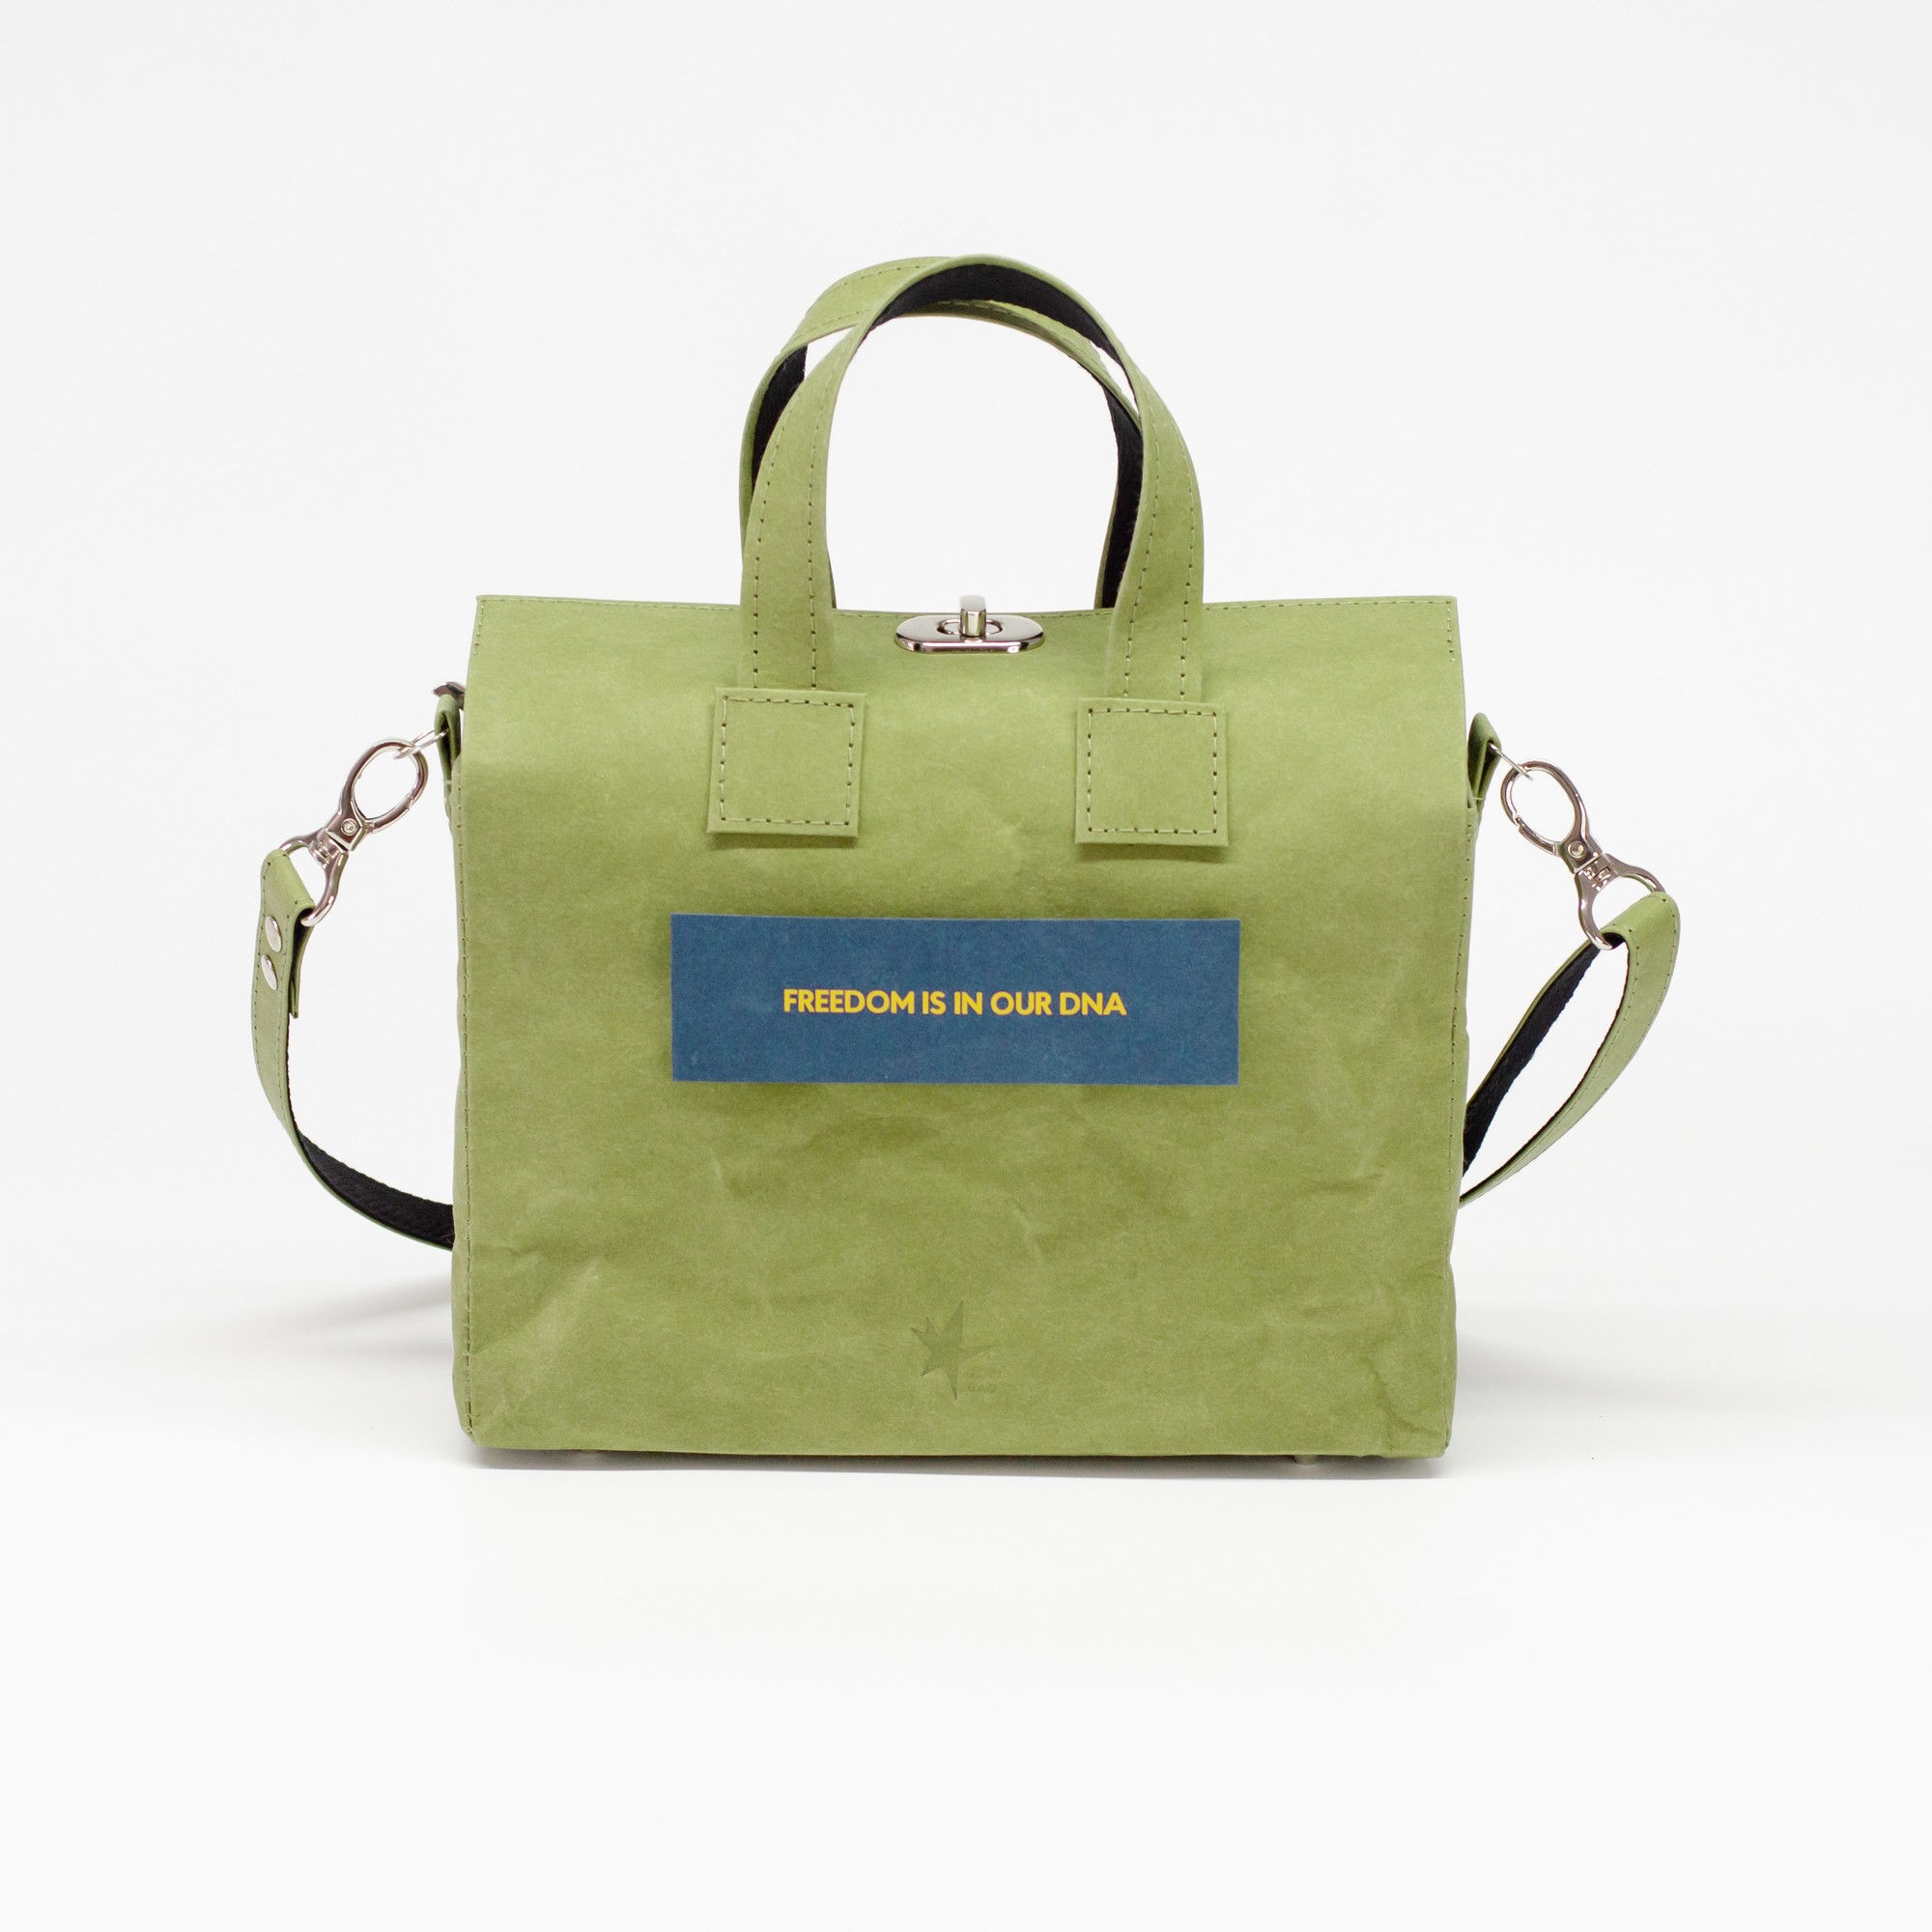 VIRGO Bag with removable pin "Freedom is in our DNA" - Olive Color by Zori Bag